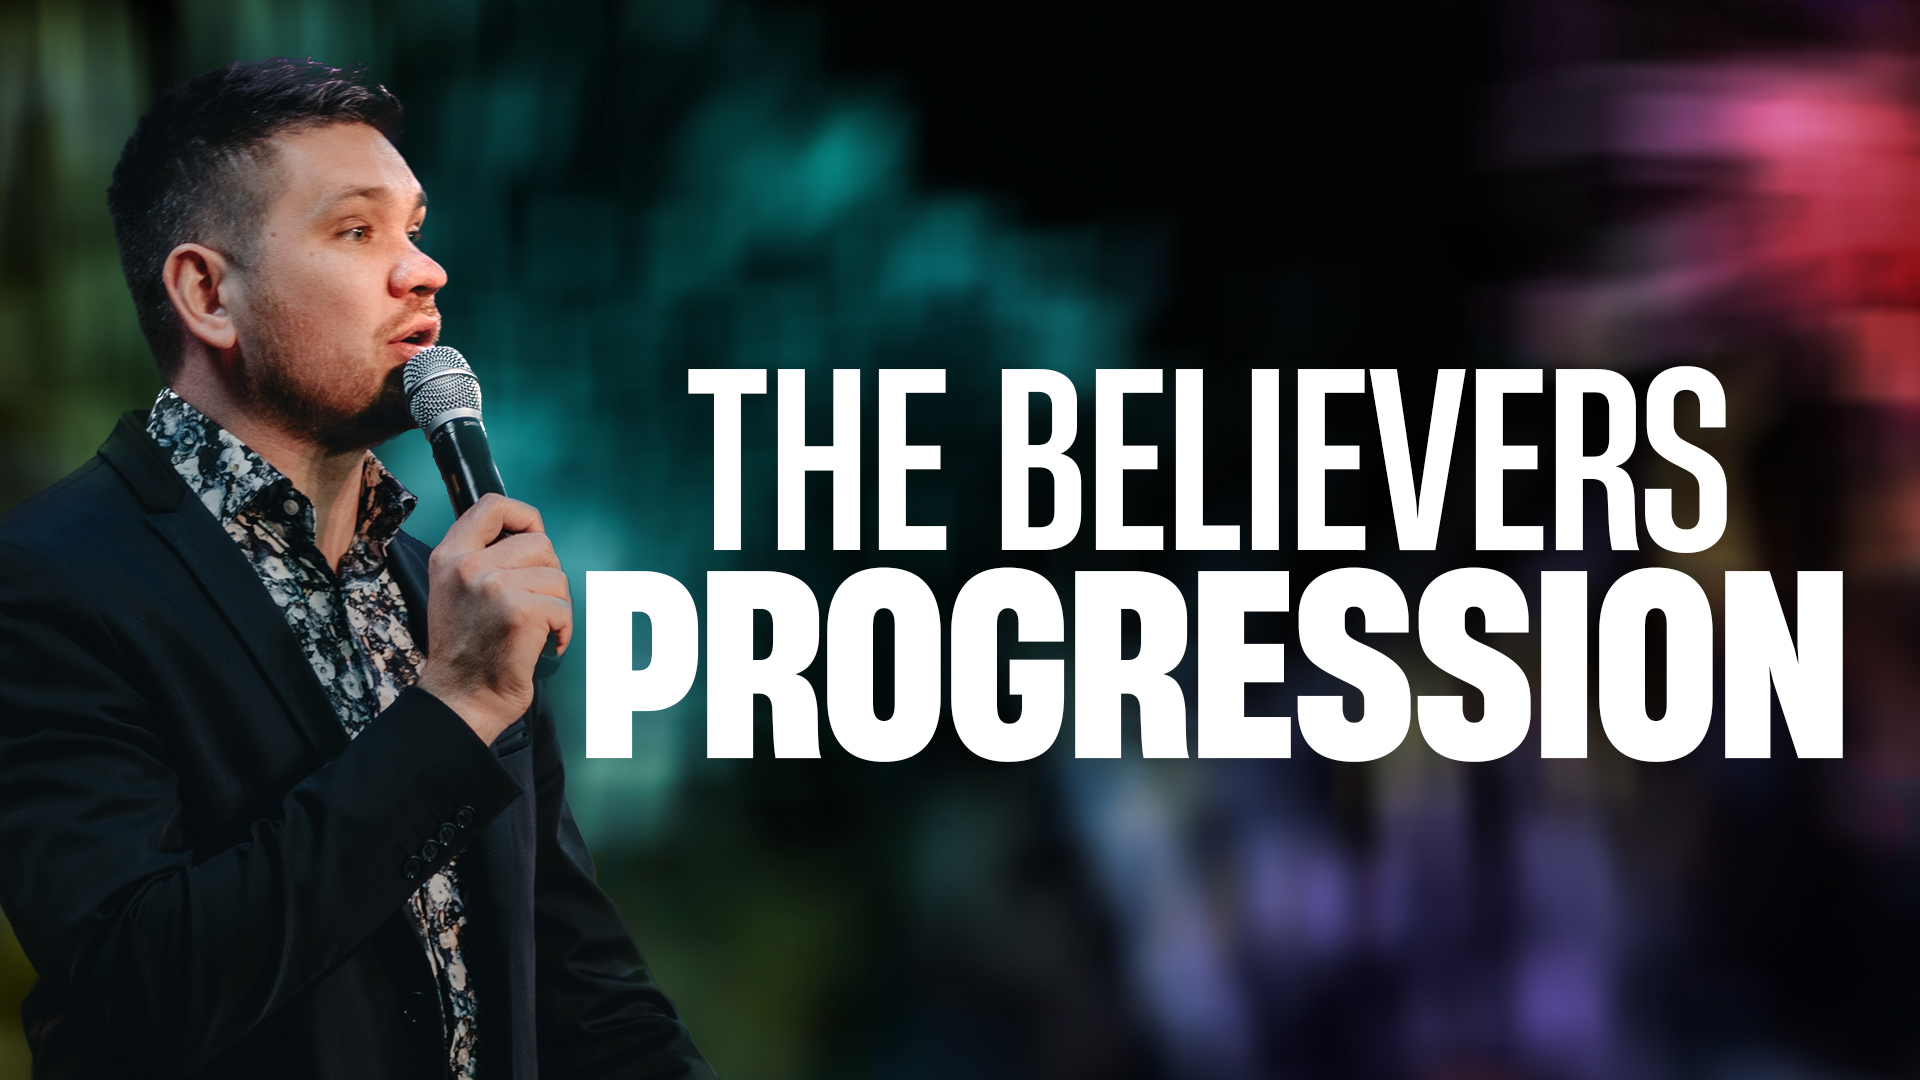 Featured Image for “The Believers Progression”